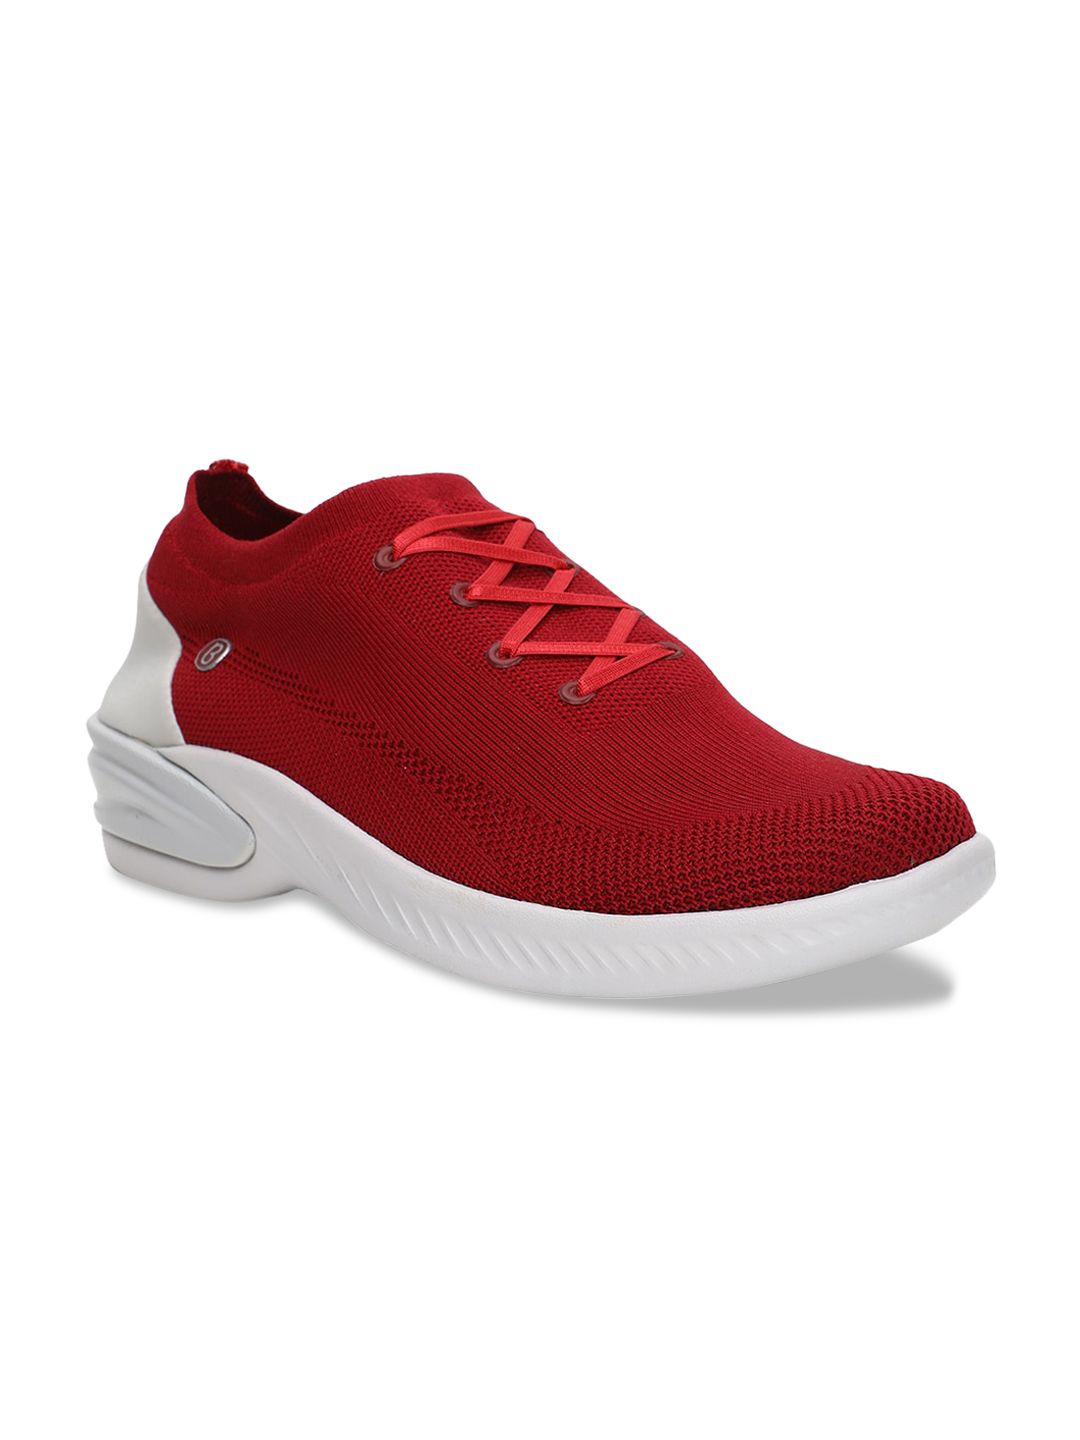 Naturalizer Women Red Woven Design Sneakers Price in India